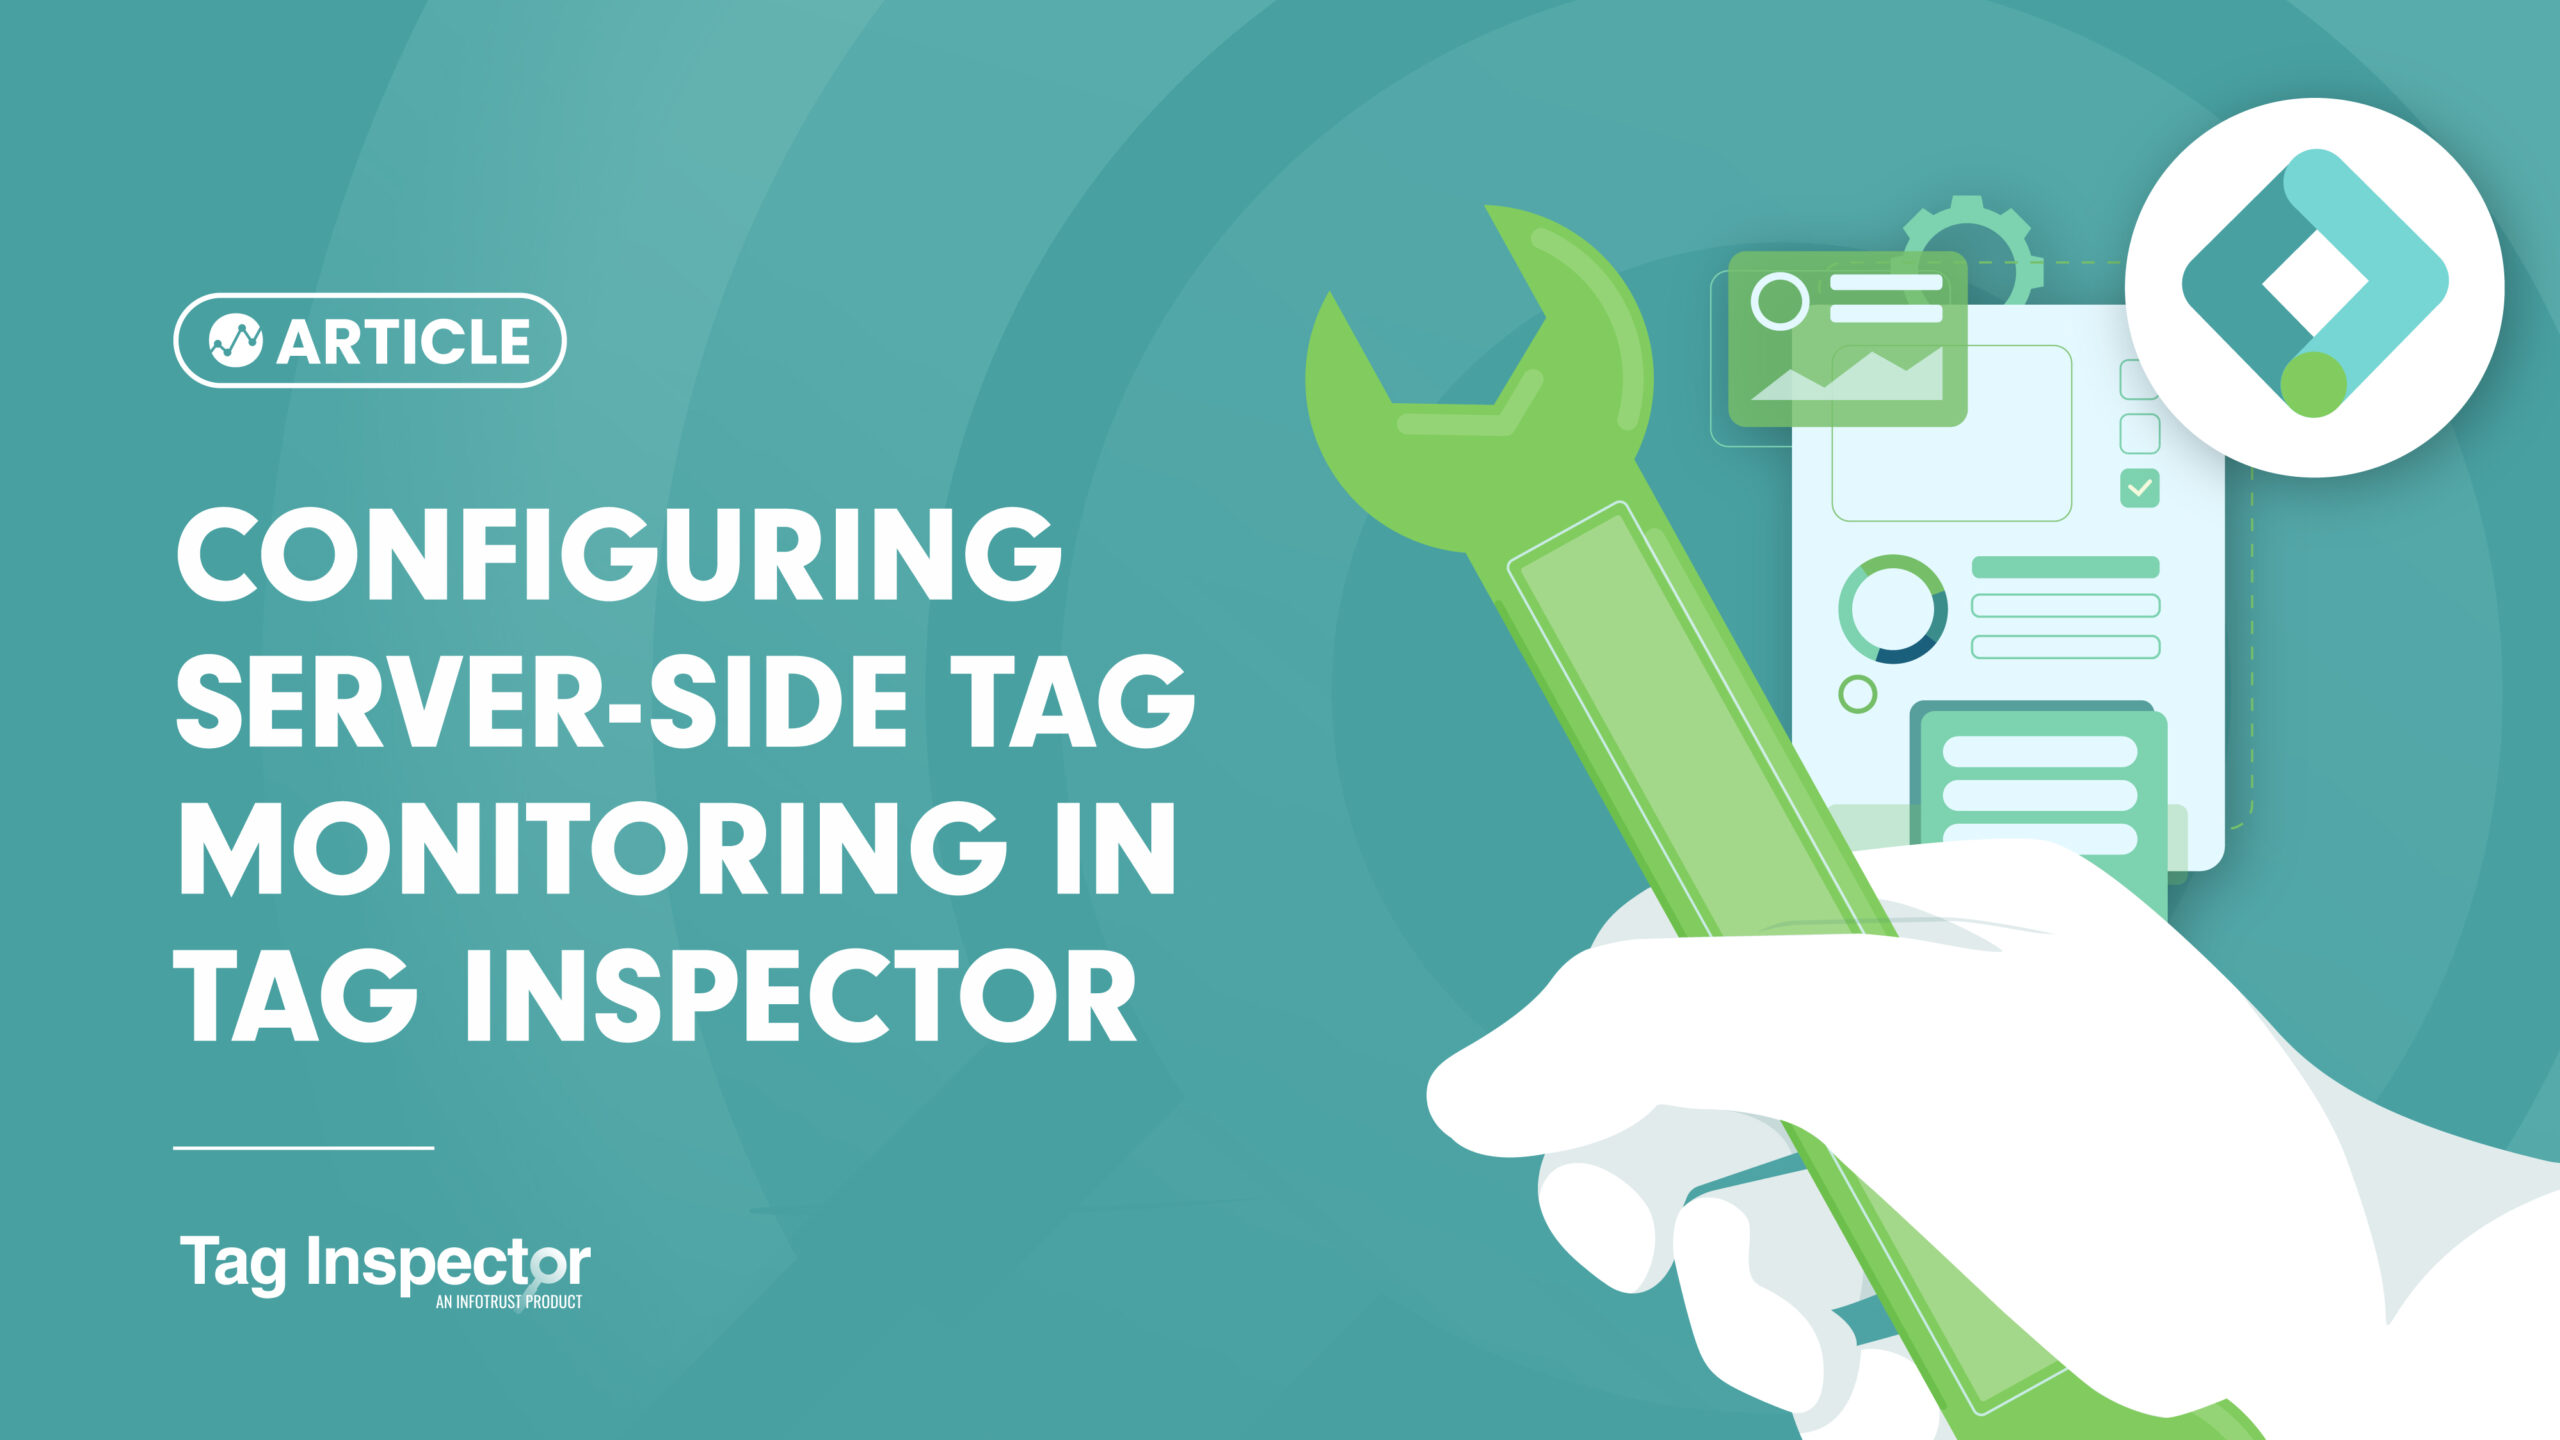 Configuring Server-side Tag Monitoring in Tag Inspector